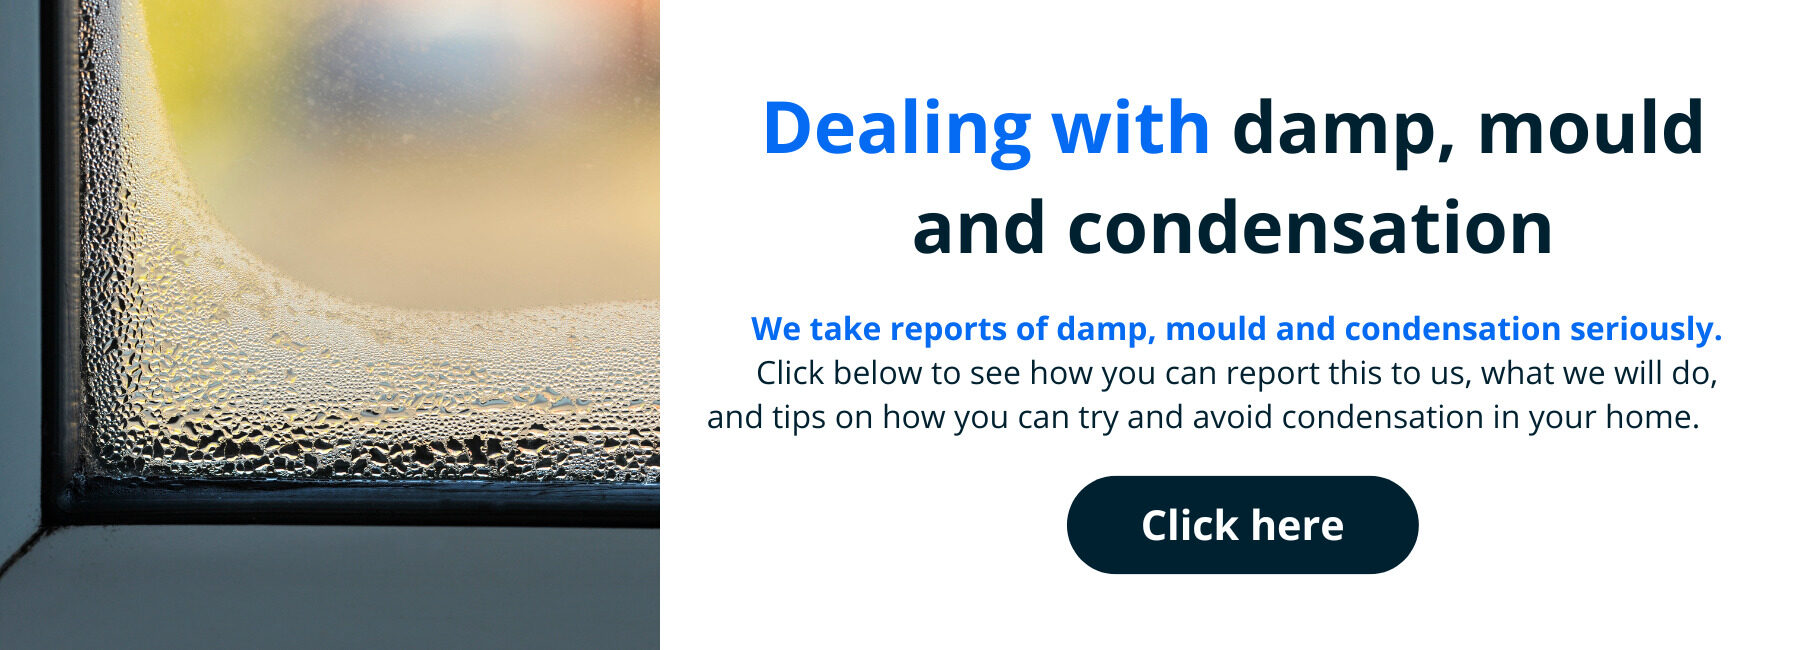 https://www.havebury.com/repairs-and-maintenance/mould-and-condensation/